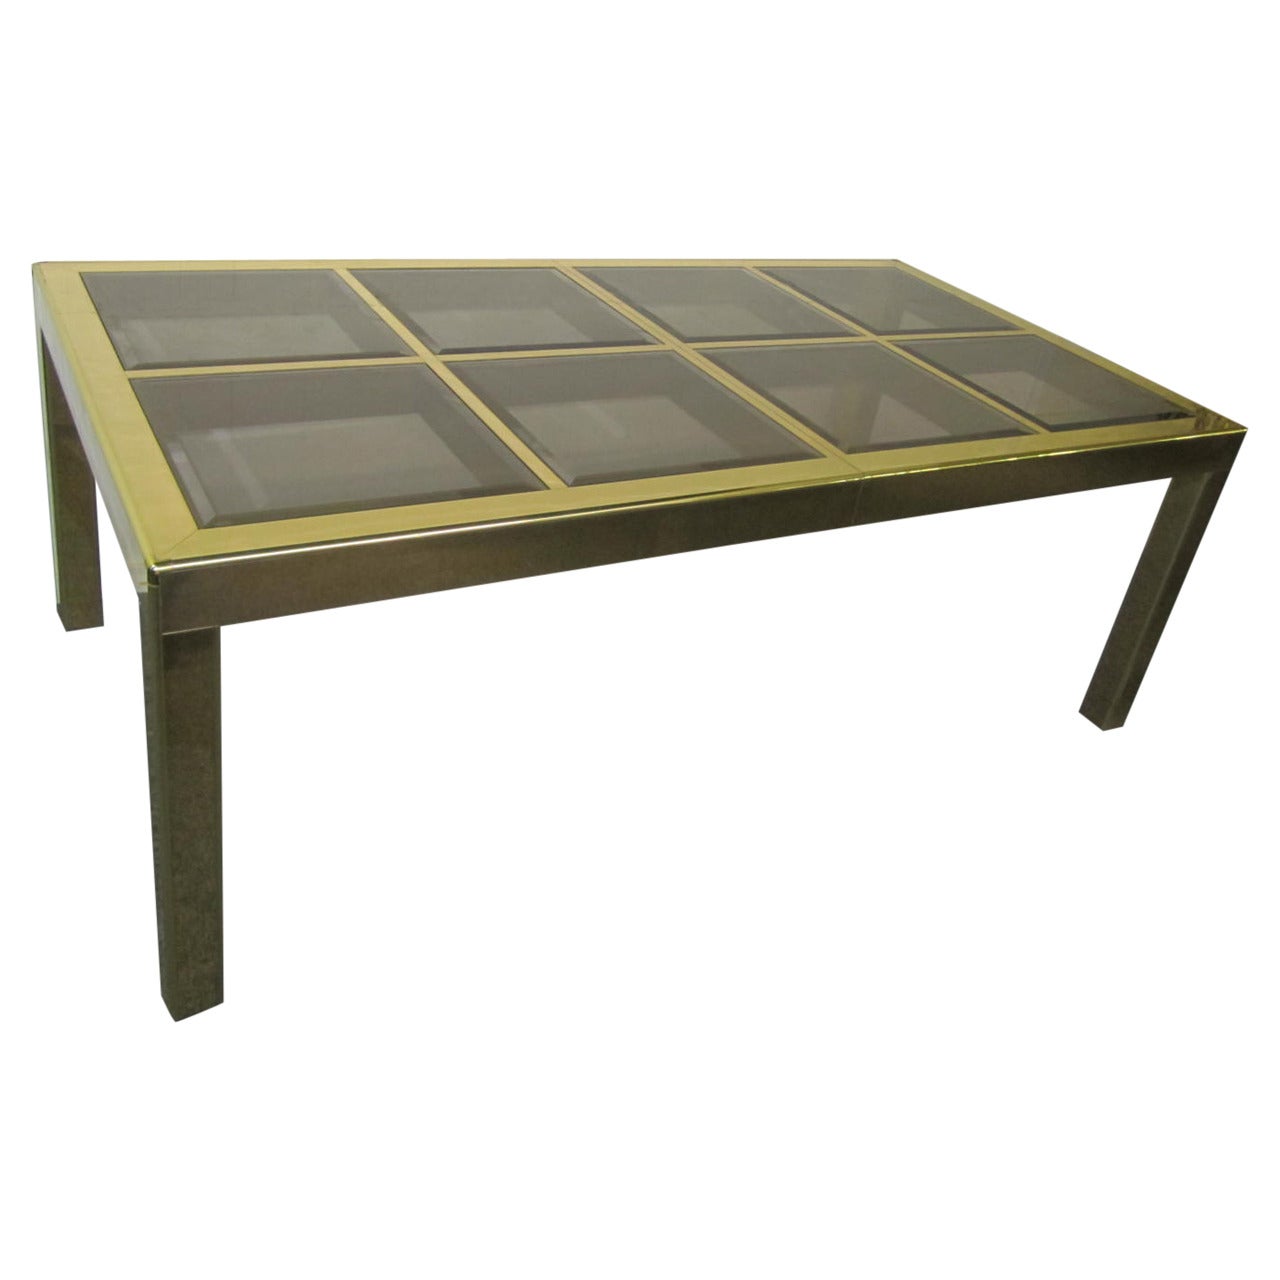 Mastercraft Brass Dining Table with Bevelled Glass Insets Regency Modern